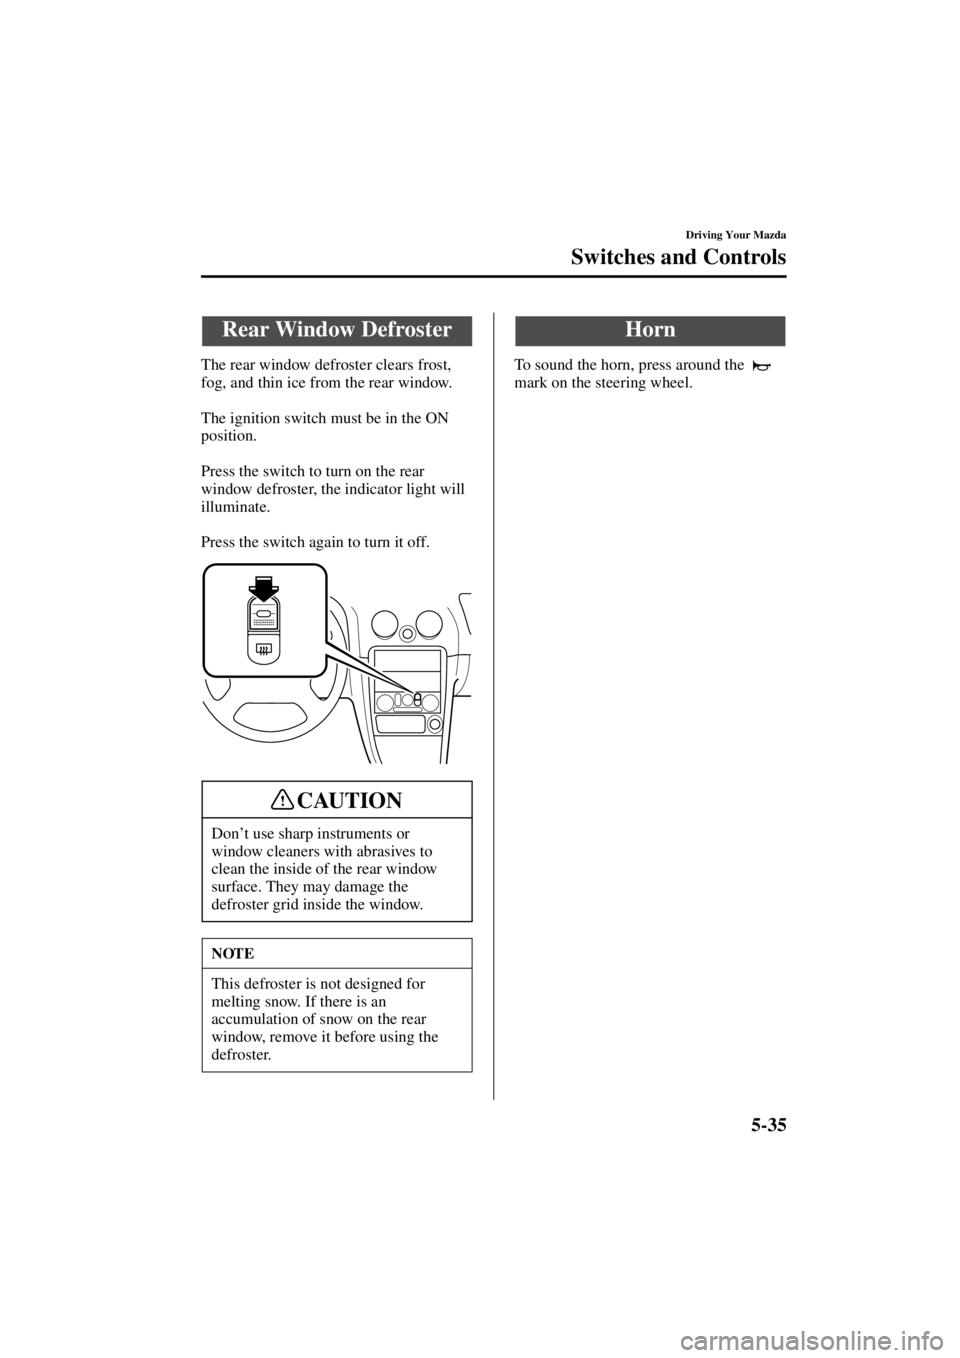 MAZDA MODEL SPEED MX-5 MIATA 2004  Owners Manual 5-35
Driving Your Mazda
Switches and Controls
Form No. 8T02-EA-03L
The rear window defroster clears frost, 
fog, and thin ice from the rear window.
The ignition switch must be in the ON 
position.
Pre